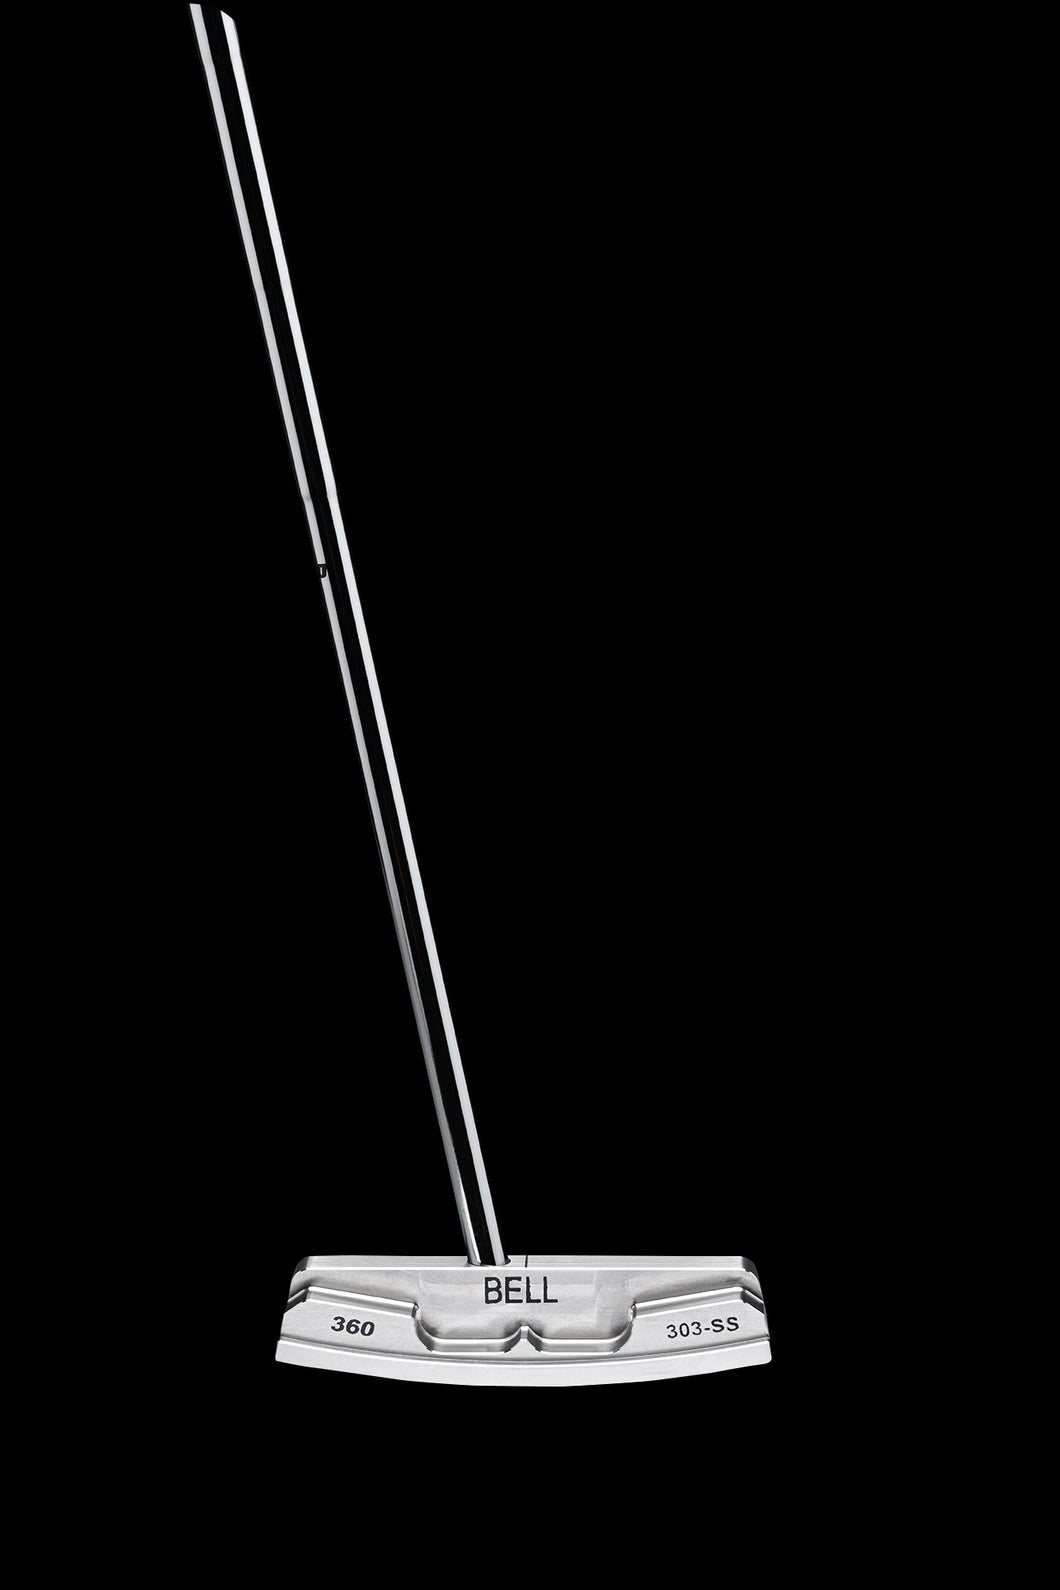 Bell N-360 No Offset Right Hand Upright Lie 79 Degrees Toe Balance Polished Putter -